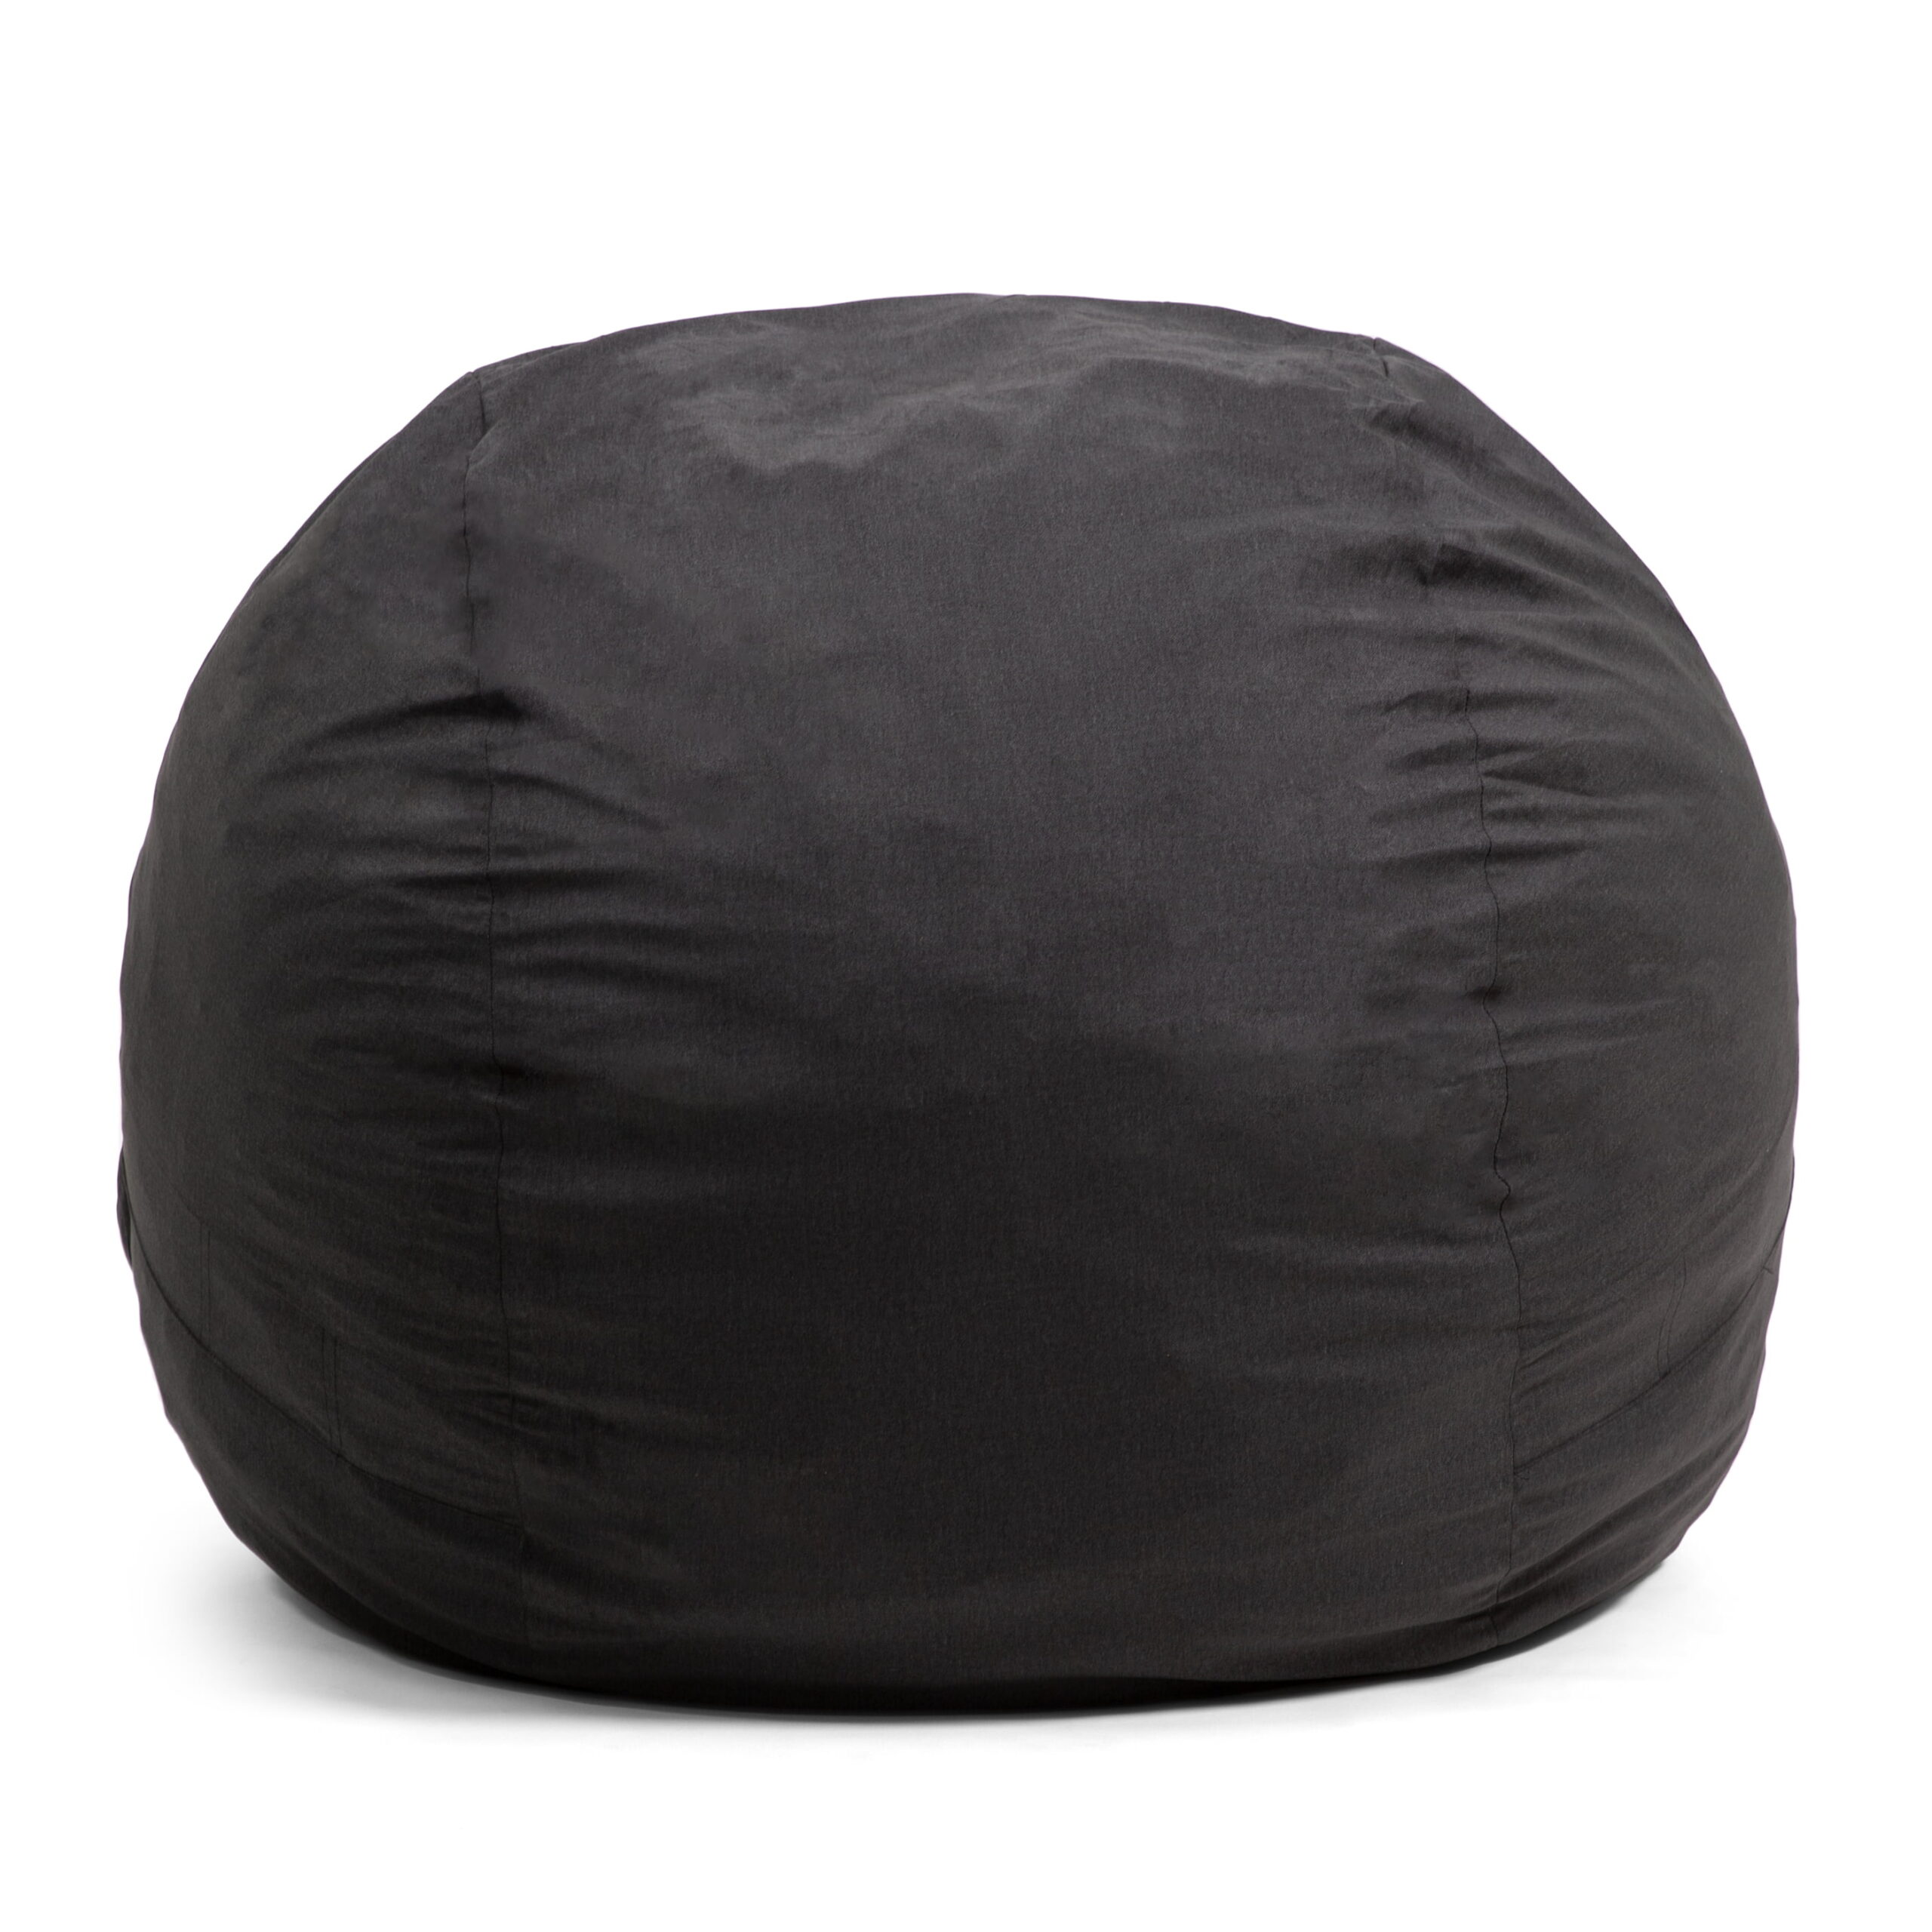  Big Joe Fuf Large Foam Filled Bean Bag Chair with Removable  Cover, Black Lenox, 4ft Big & Bean Refill 2Pk Polystyrene Beans for Bean  Bags or Crafts, 100 Liters per Bag 